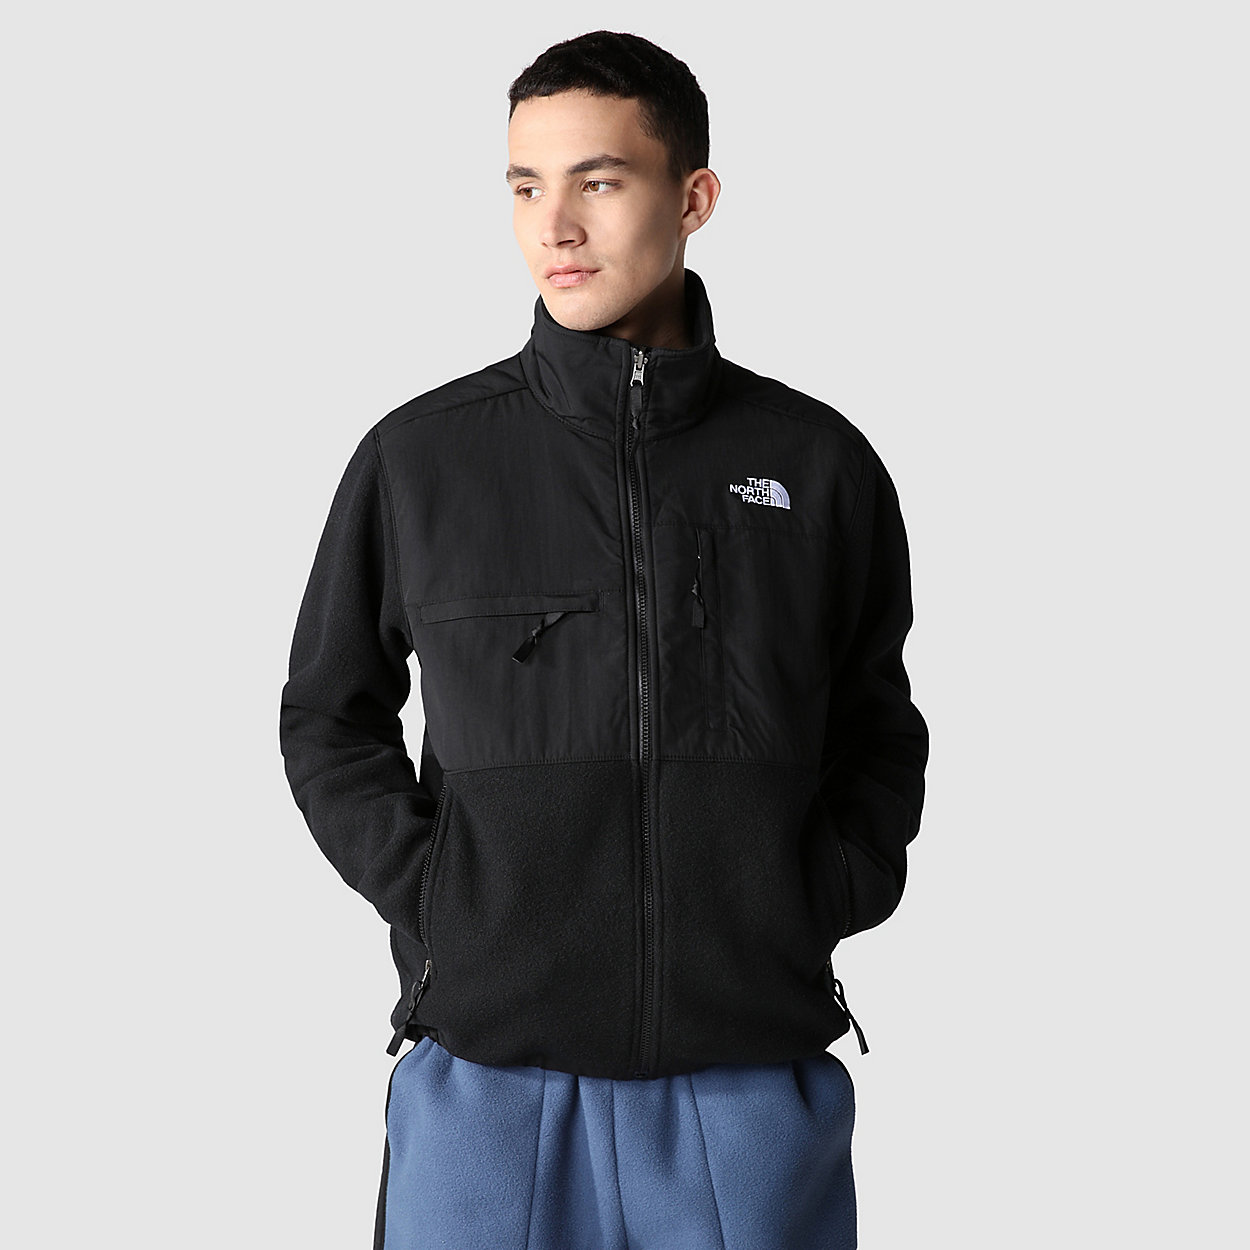 Unlock Wilderness' choice in the Berghaus Vs North Face comparison, the Denali Jacket by The North Face